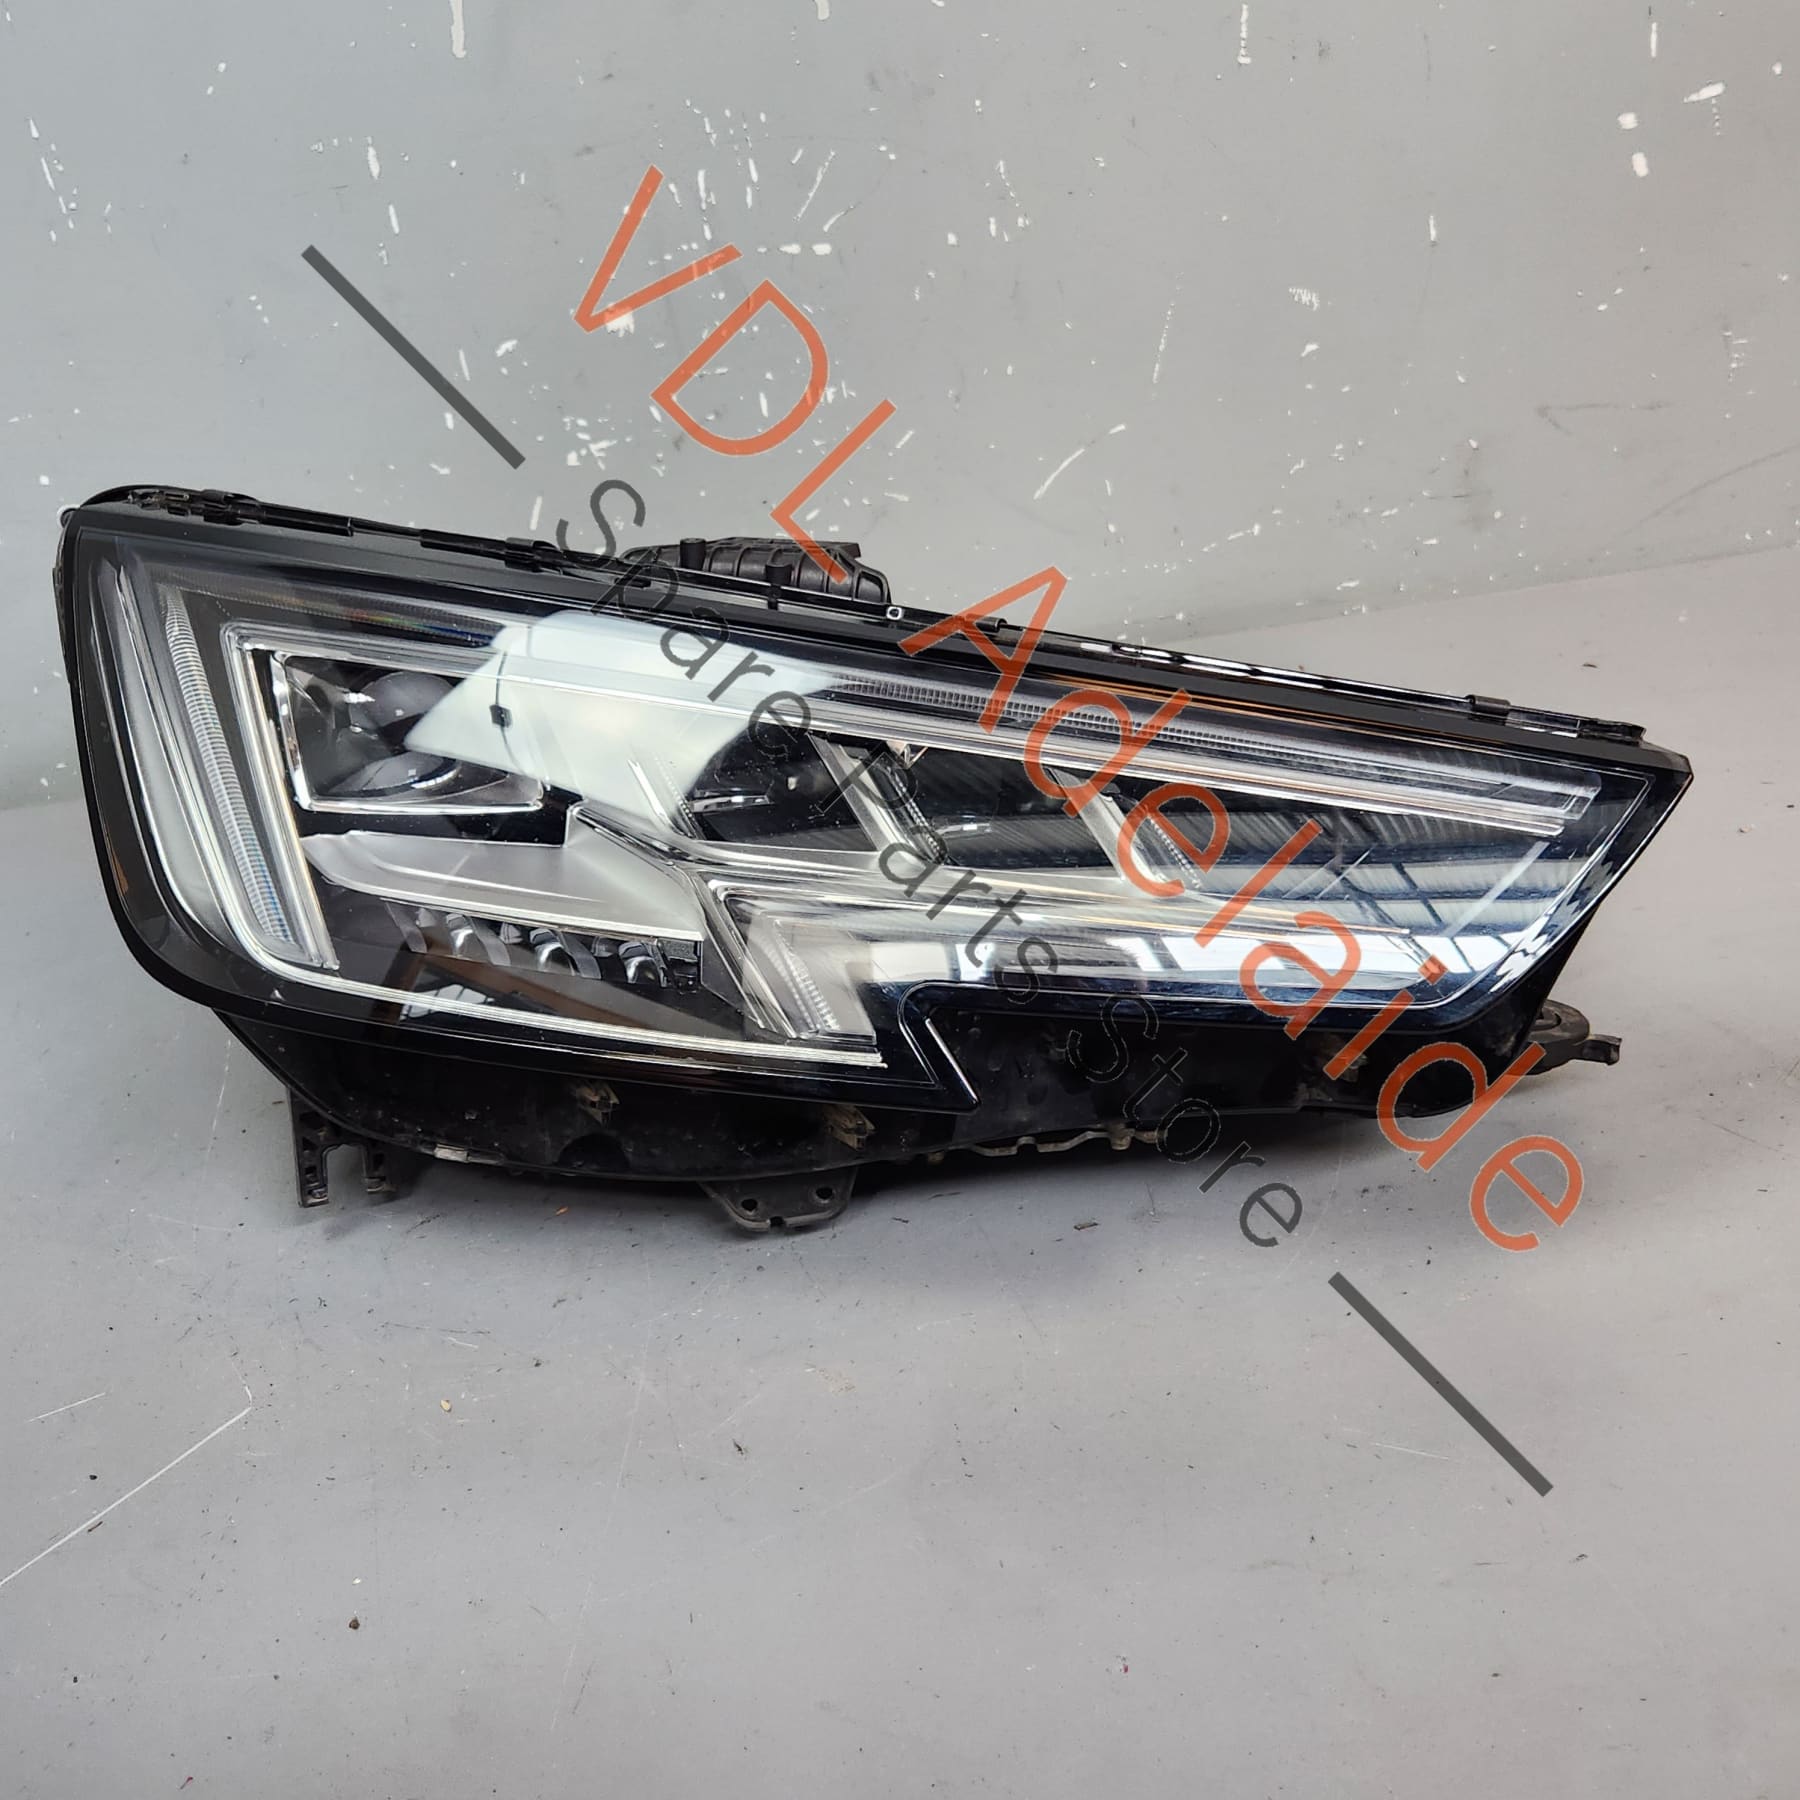 8W0941784A 8W0941036A 7PP941571BC Audi S4 A4 B9 LED Headlight with Matrix Beam Right for RHD Models 8W0941036A 8W0941784A 7PP941571BC 4M0907397AD